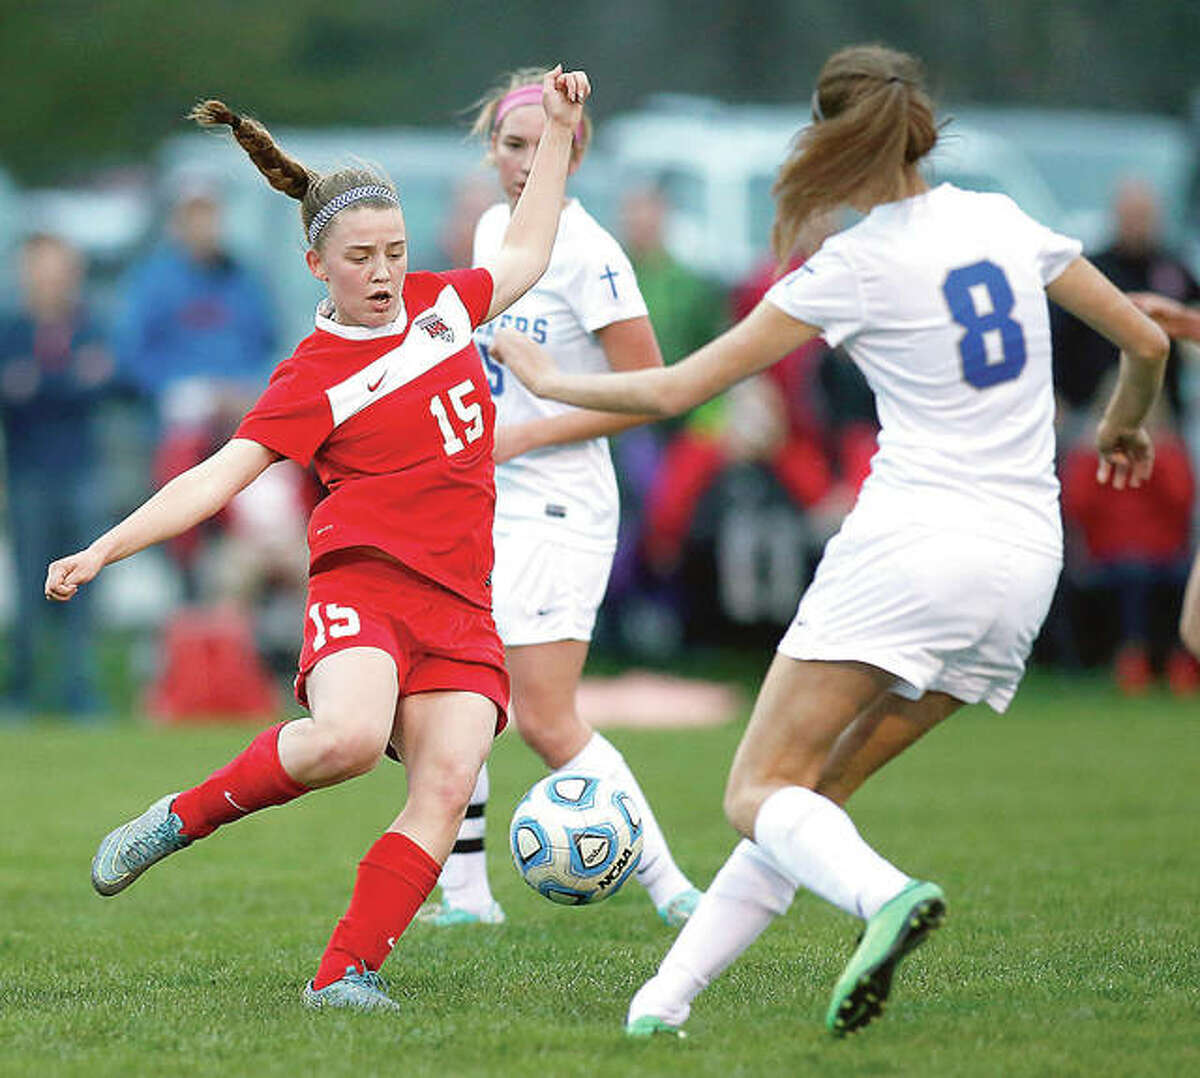 Alton’s Katie Kercher (15) and Marquette’s Kelsey Blasingham (8) battle for the ball during the 2016 game between the city rivals, the last time the Redbirds and Explorers played. Marquette and Alton will play each other for the first time since that game at 6 p.m. Wednesday at Public School Stadium.